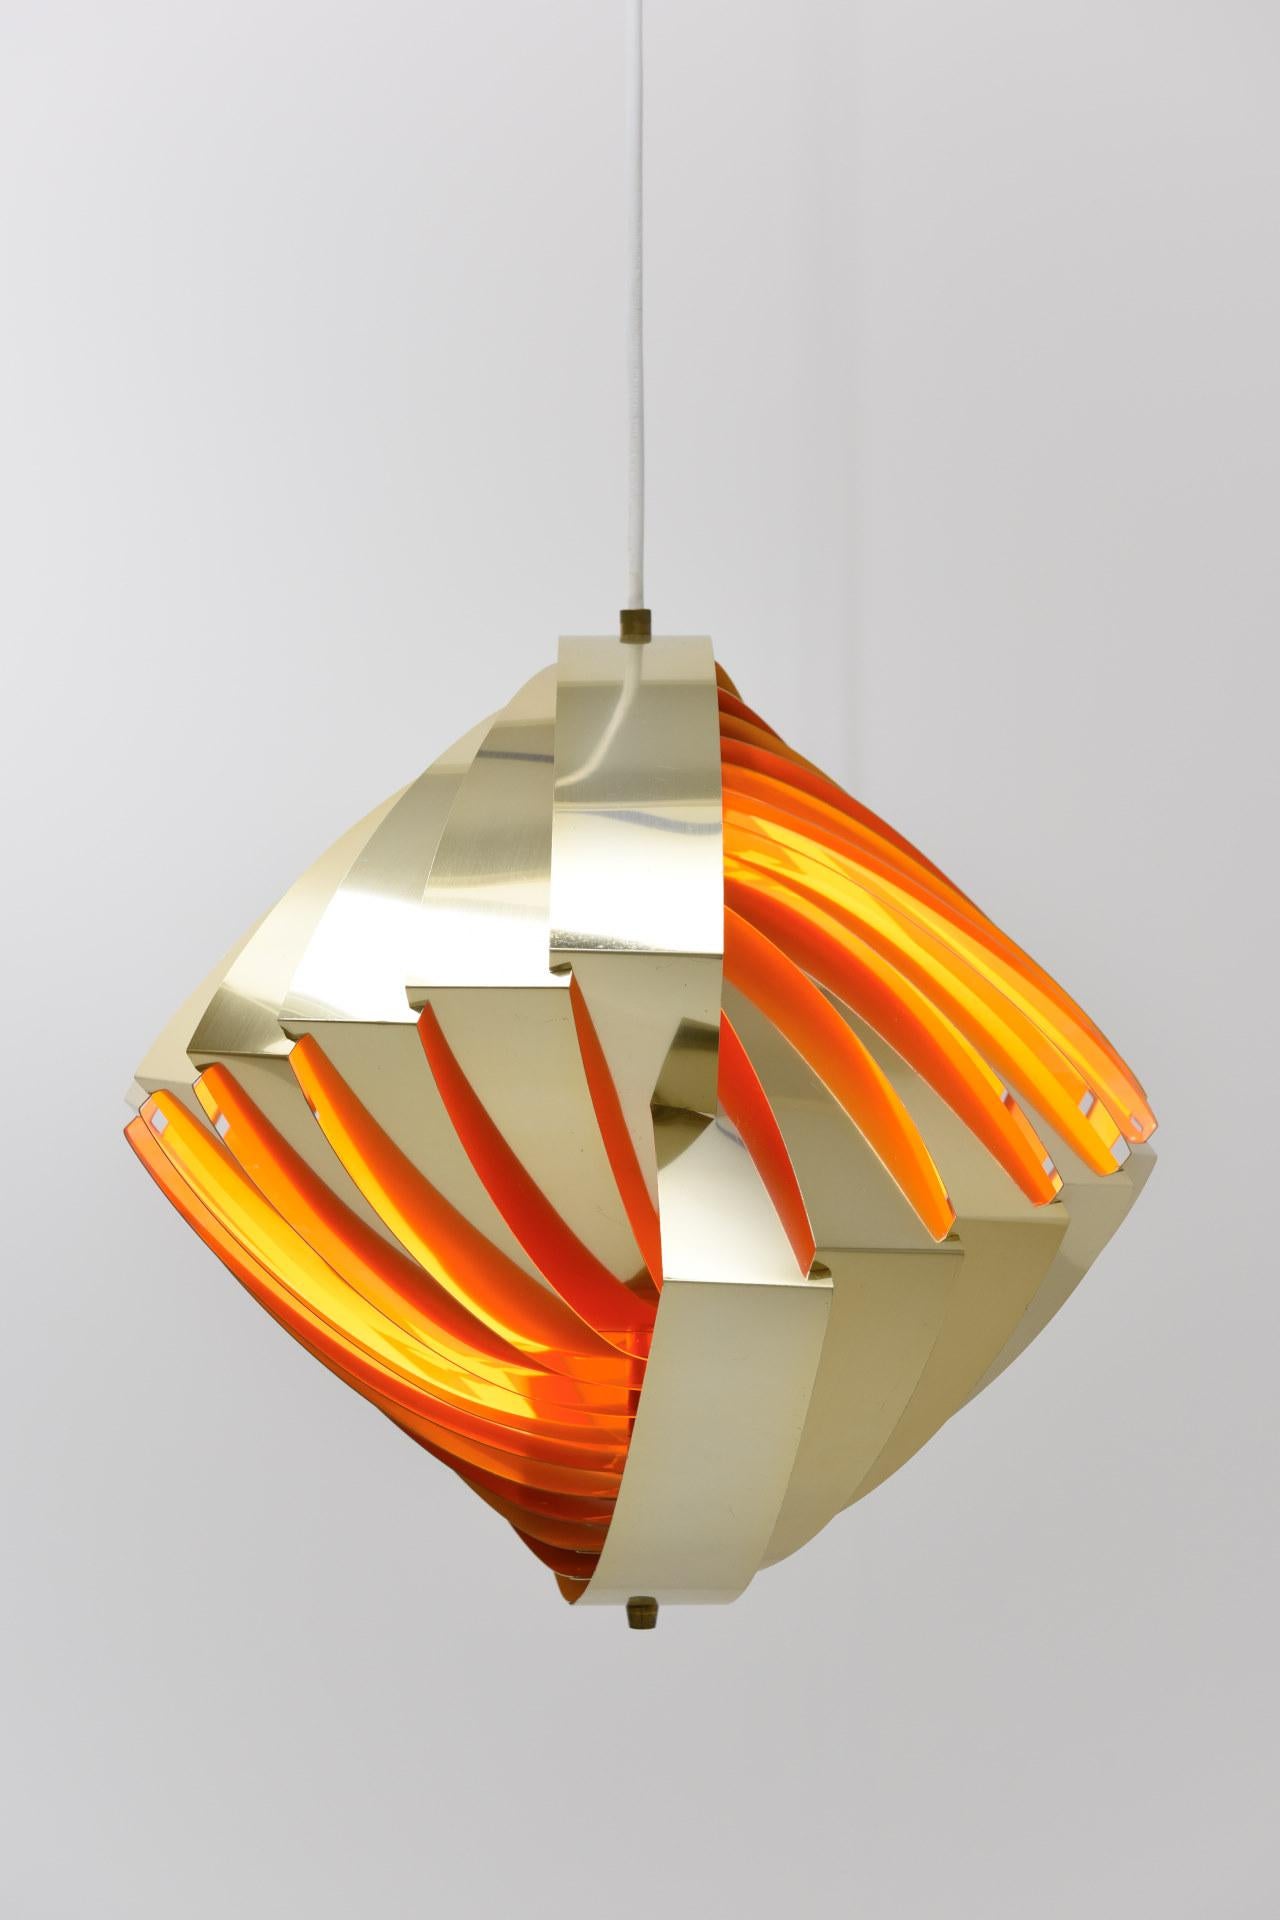 'Konkylie', or 'Conch Shell' ceiling lamp was made for the Tivoli Garden in Copenhagen in 1964. Designed by Louis Weisdorf and manufactured by Lyfa. The brass lamellas reflect the light and cover the lightbulb from any angle. The warm light is